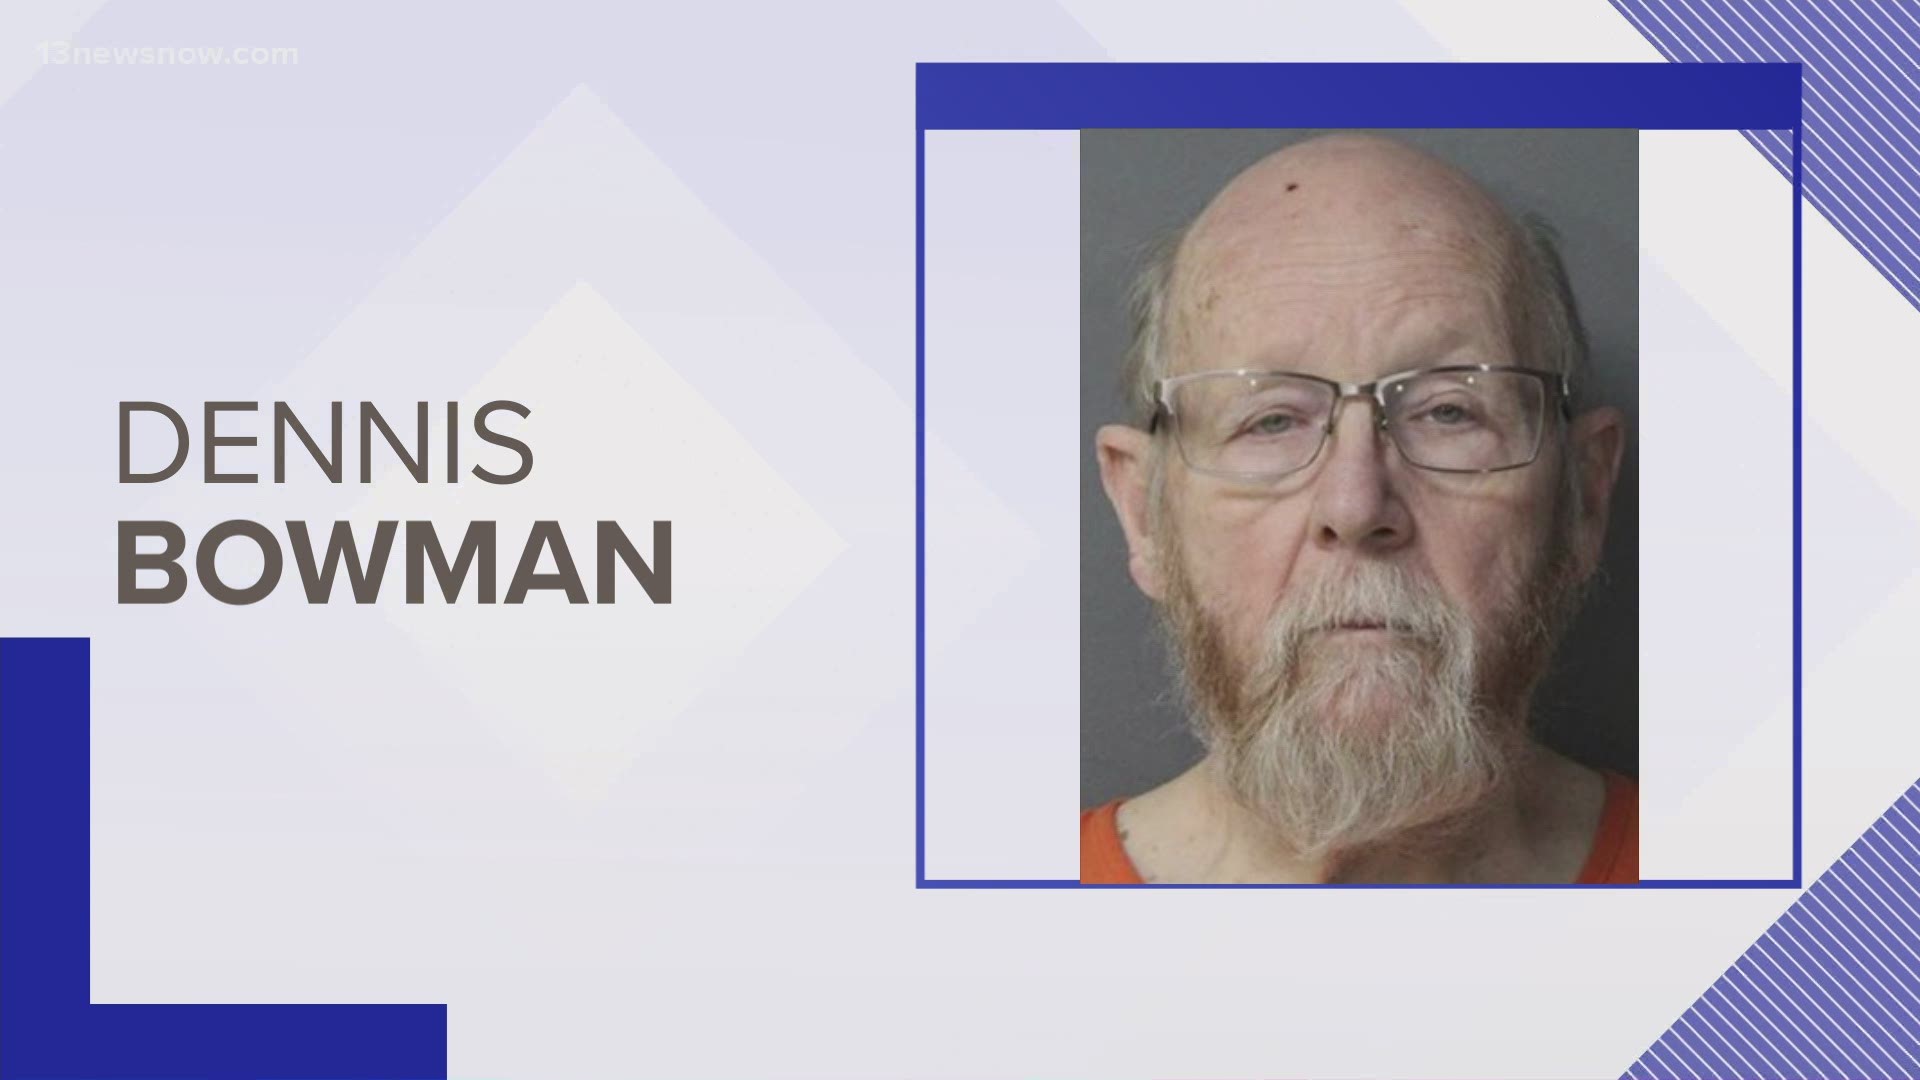 A trial will be held for Dennis Bowman in the death of his adopted daughter. Bowman is already serving a life sentence for killing a Navy wife in Norfolk in 1980.